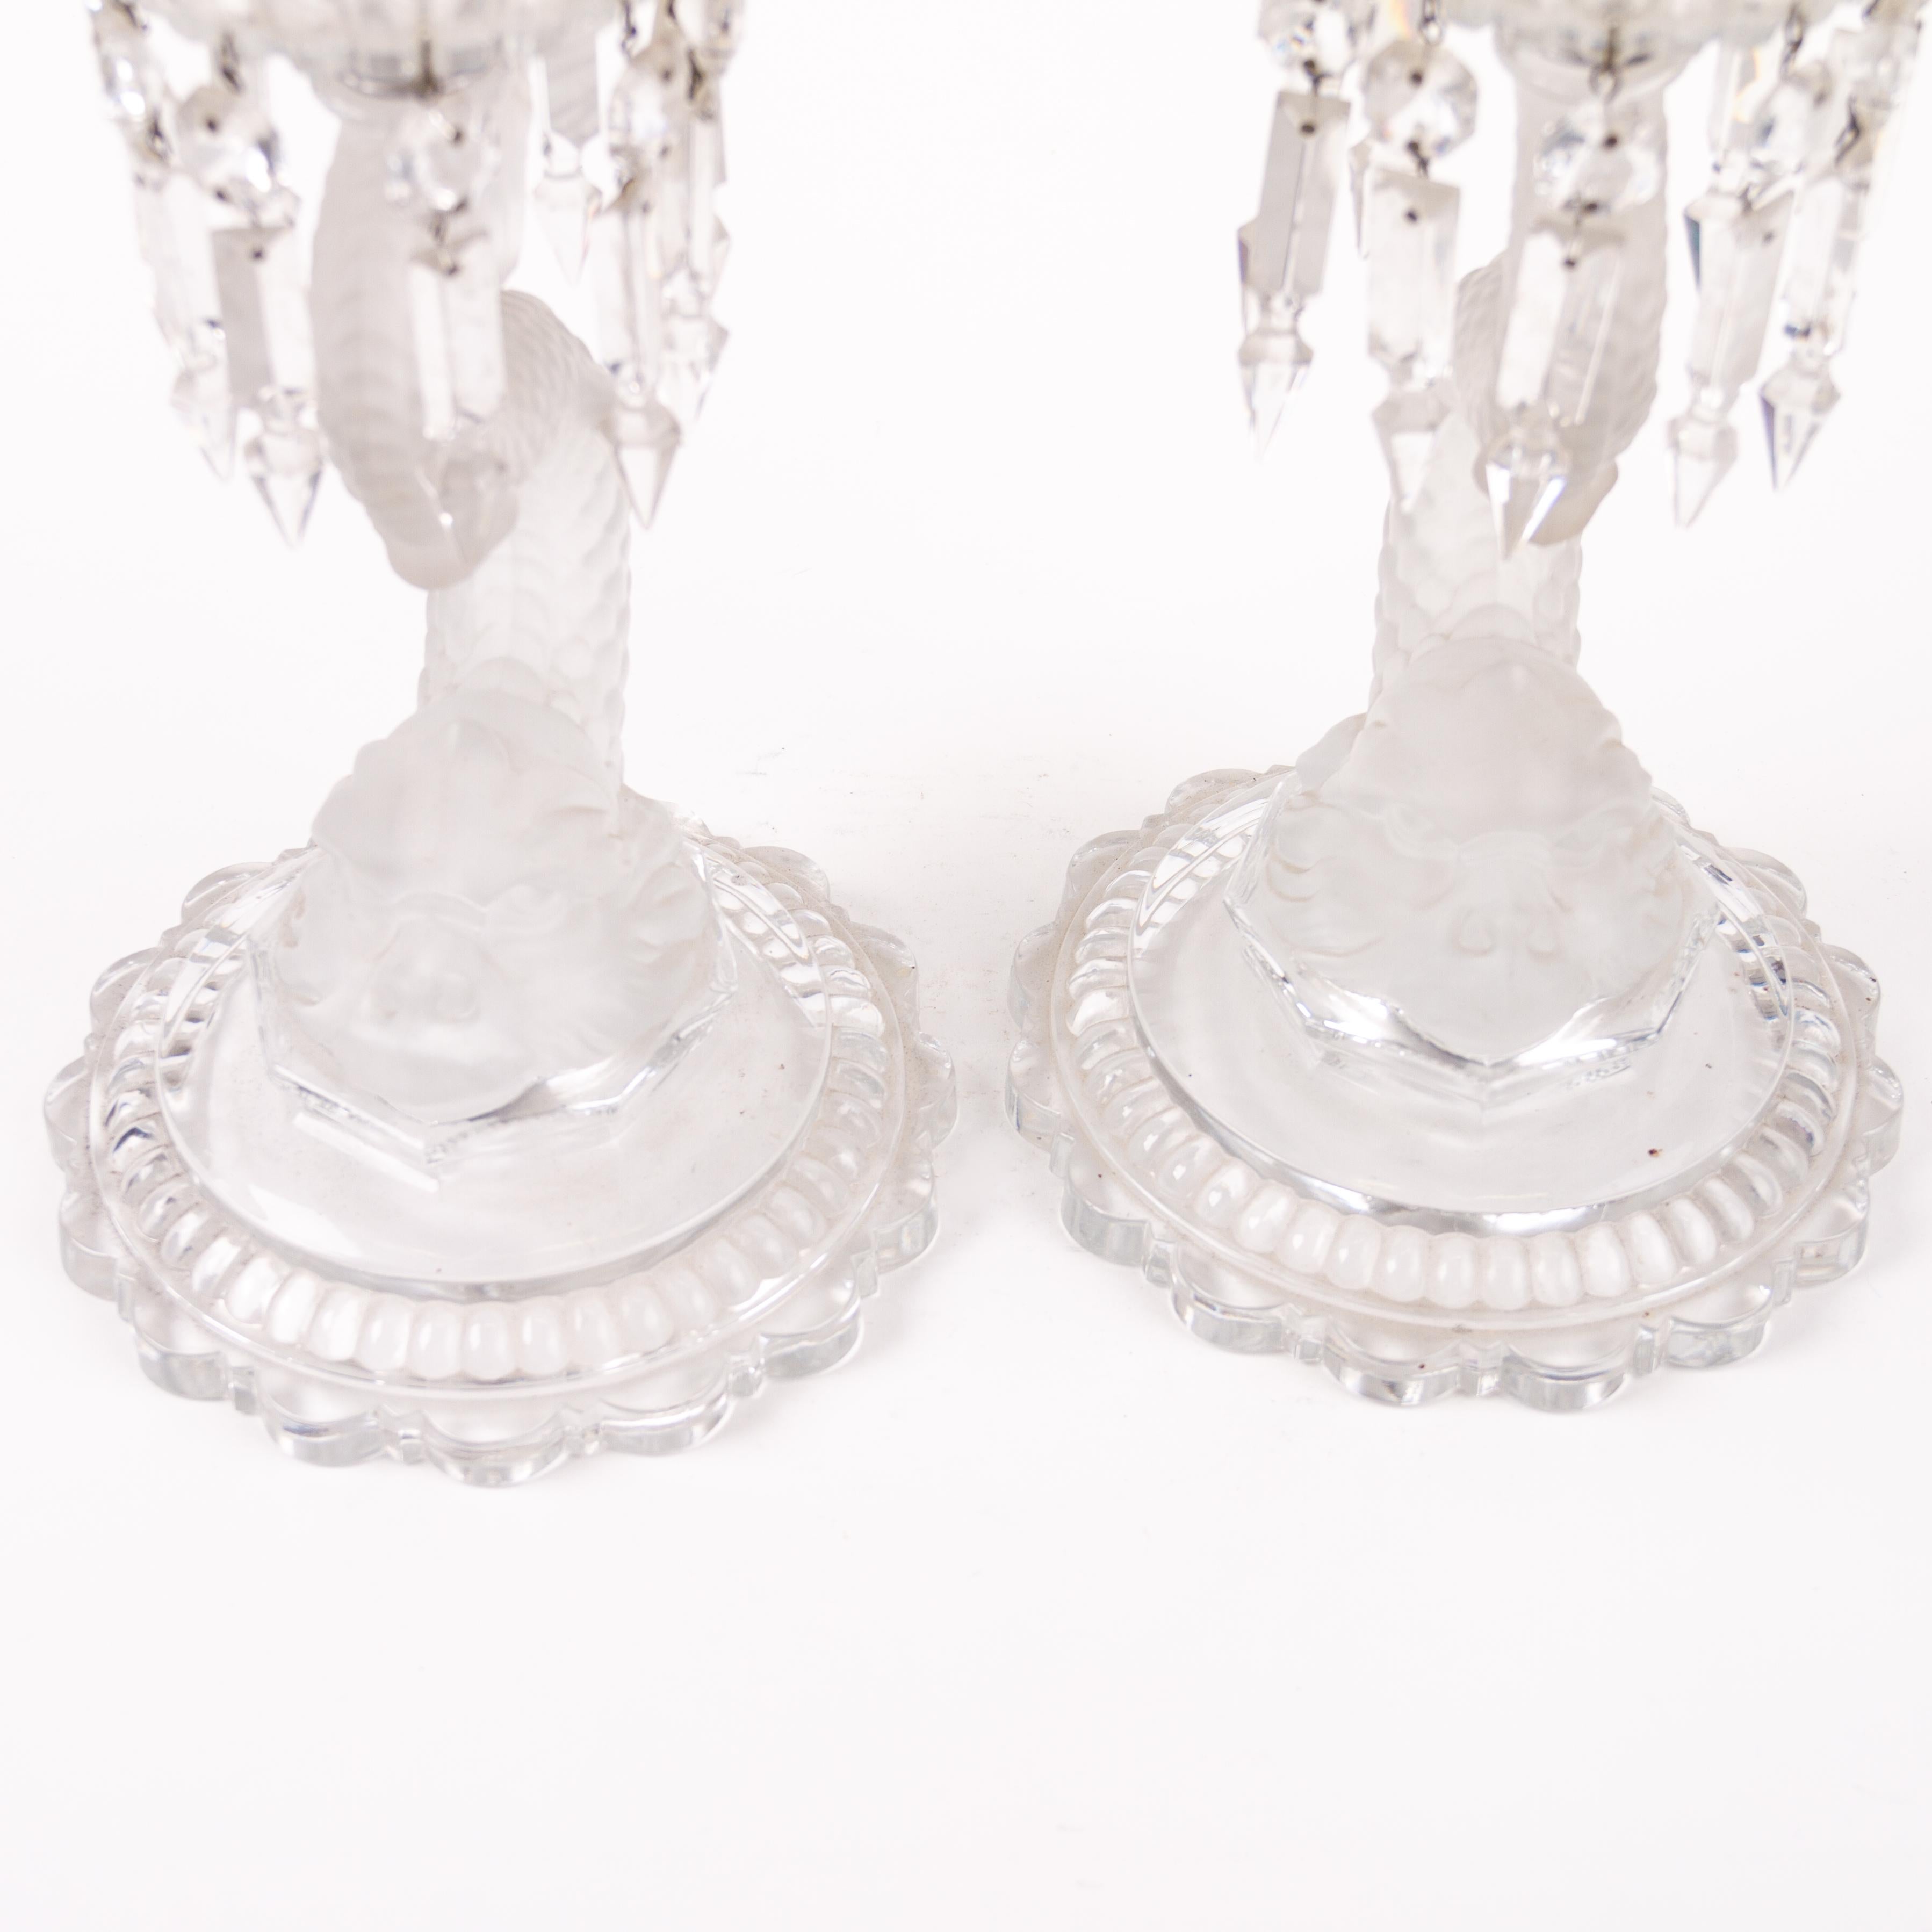 Pair of Baccarat Crystal Dolphin Candle Holders Early 20th Century For Sale 4